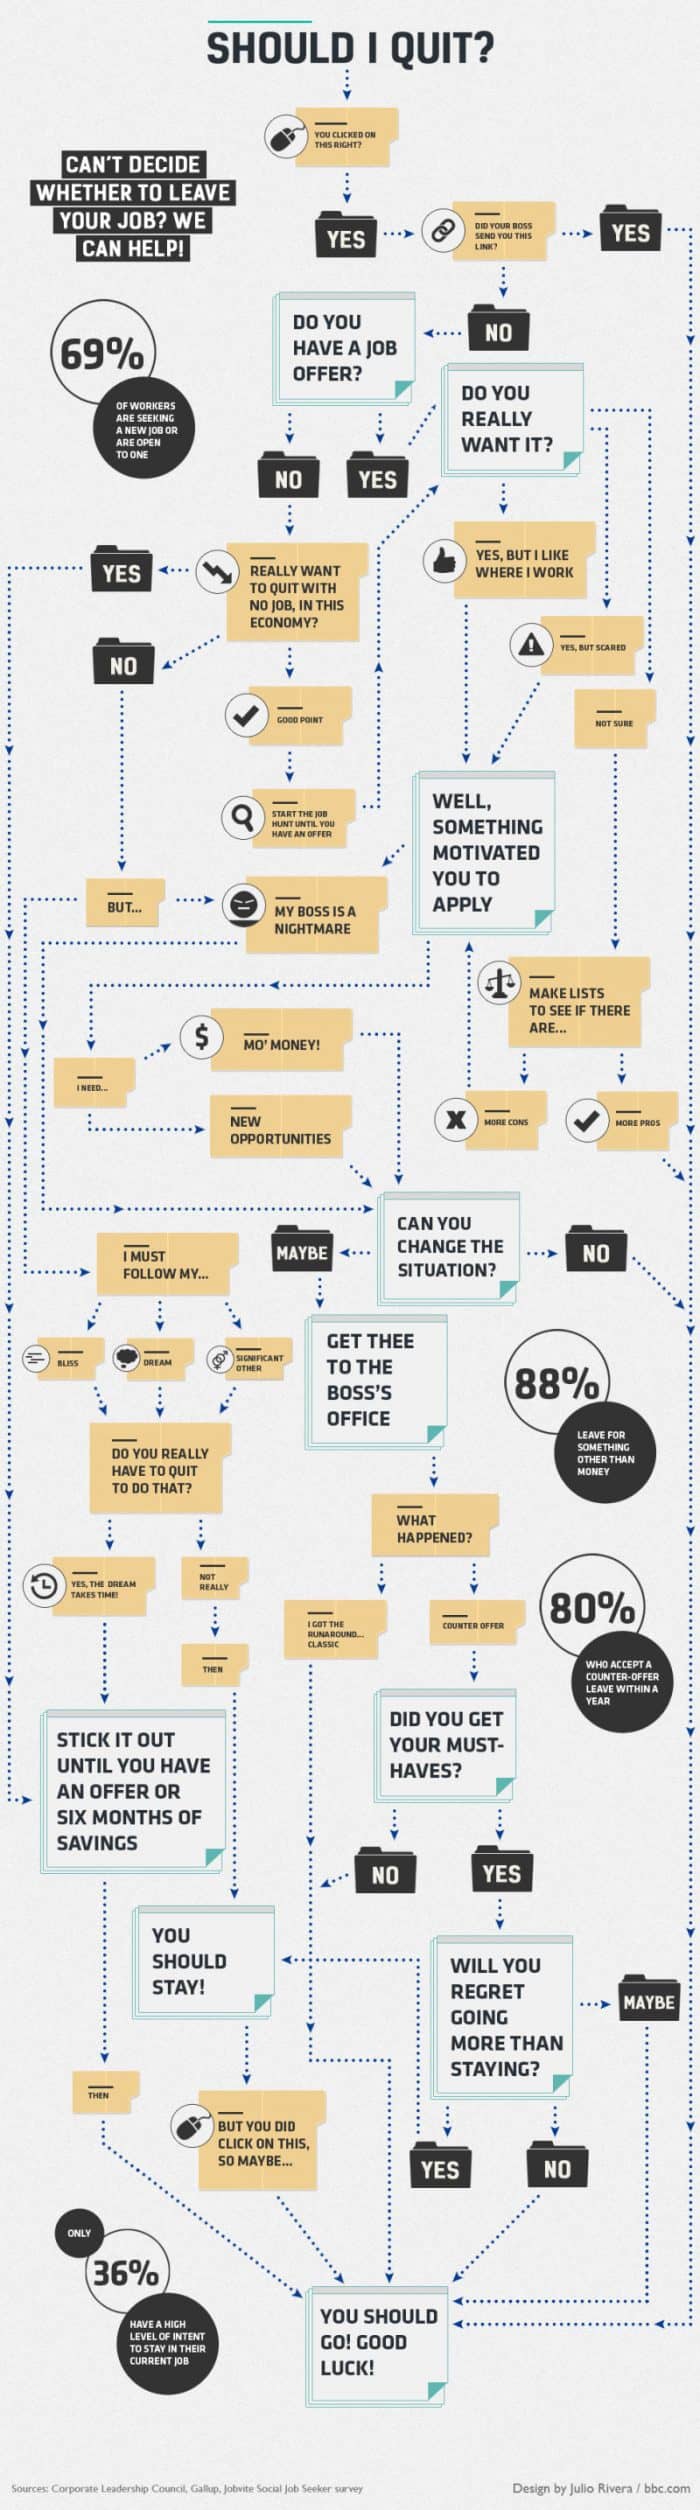 a flowchart to decide whether to quit or not